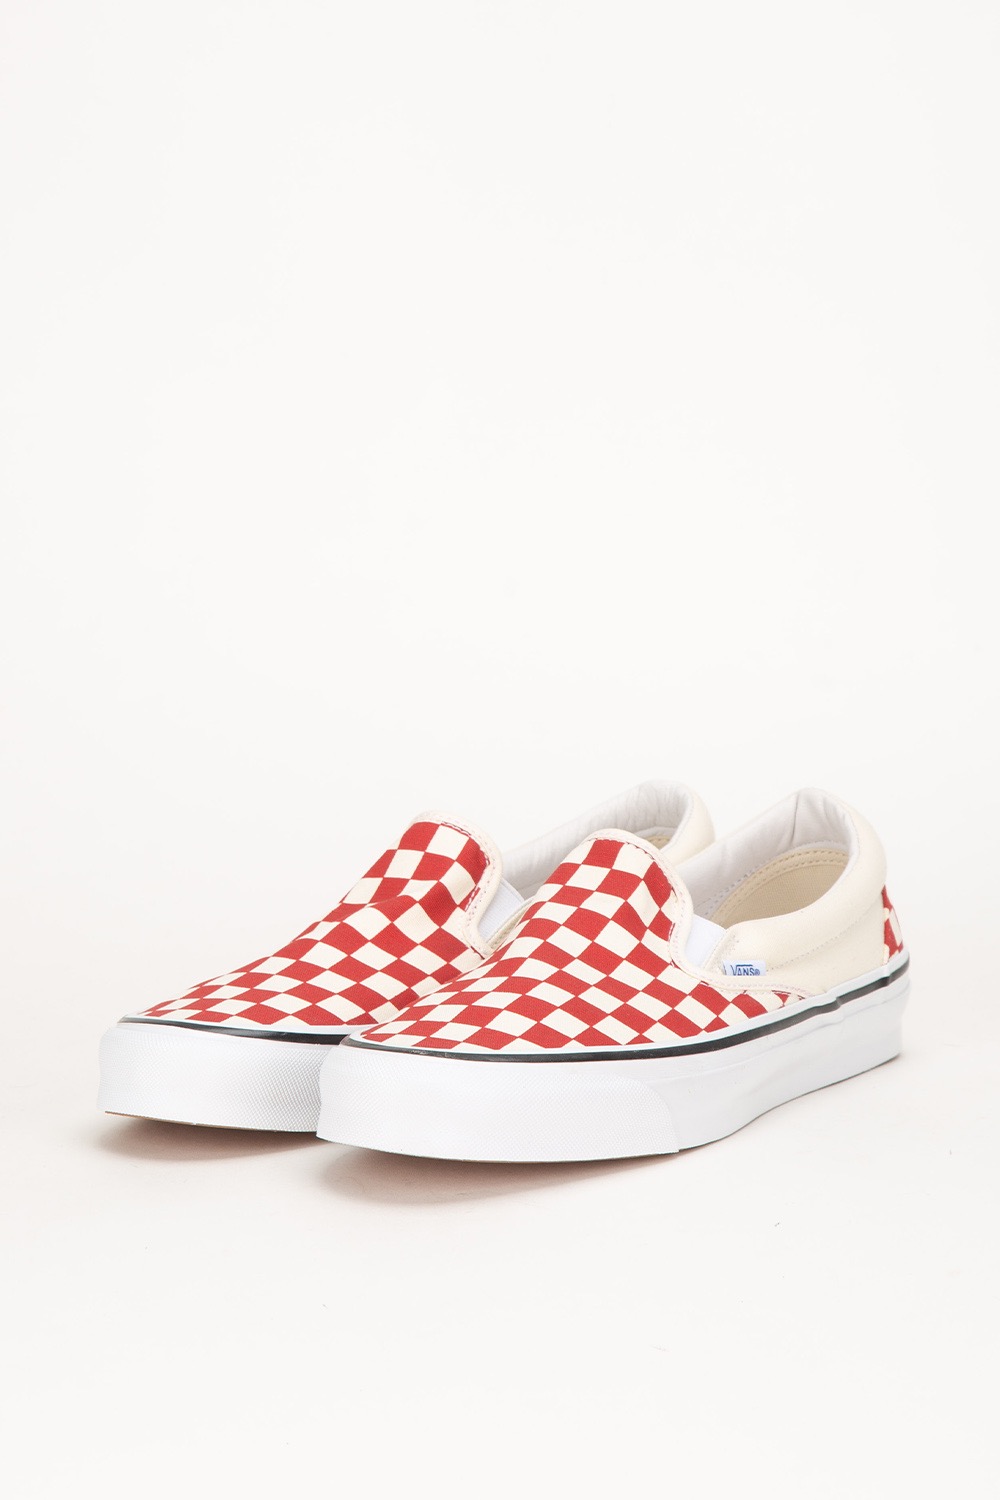 OG CLASSIC SLIP-ON LX CHECKERBOARD RACING RED/CLASSIC WHITE